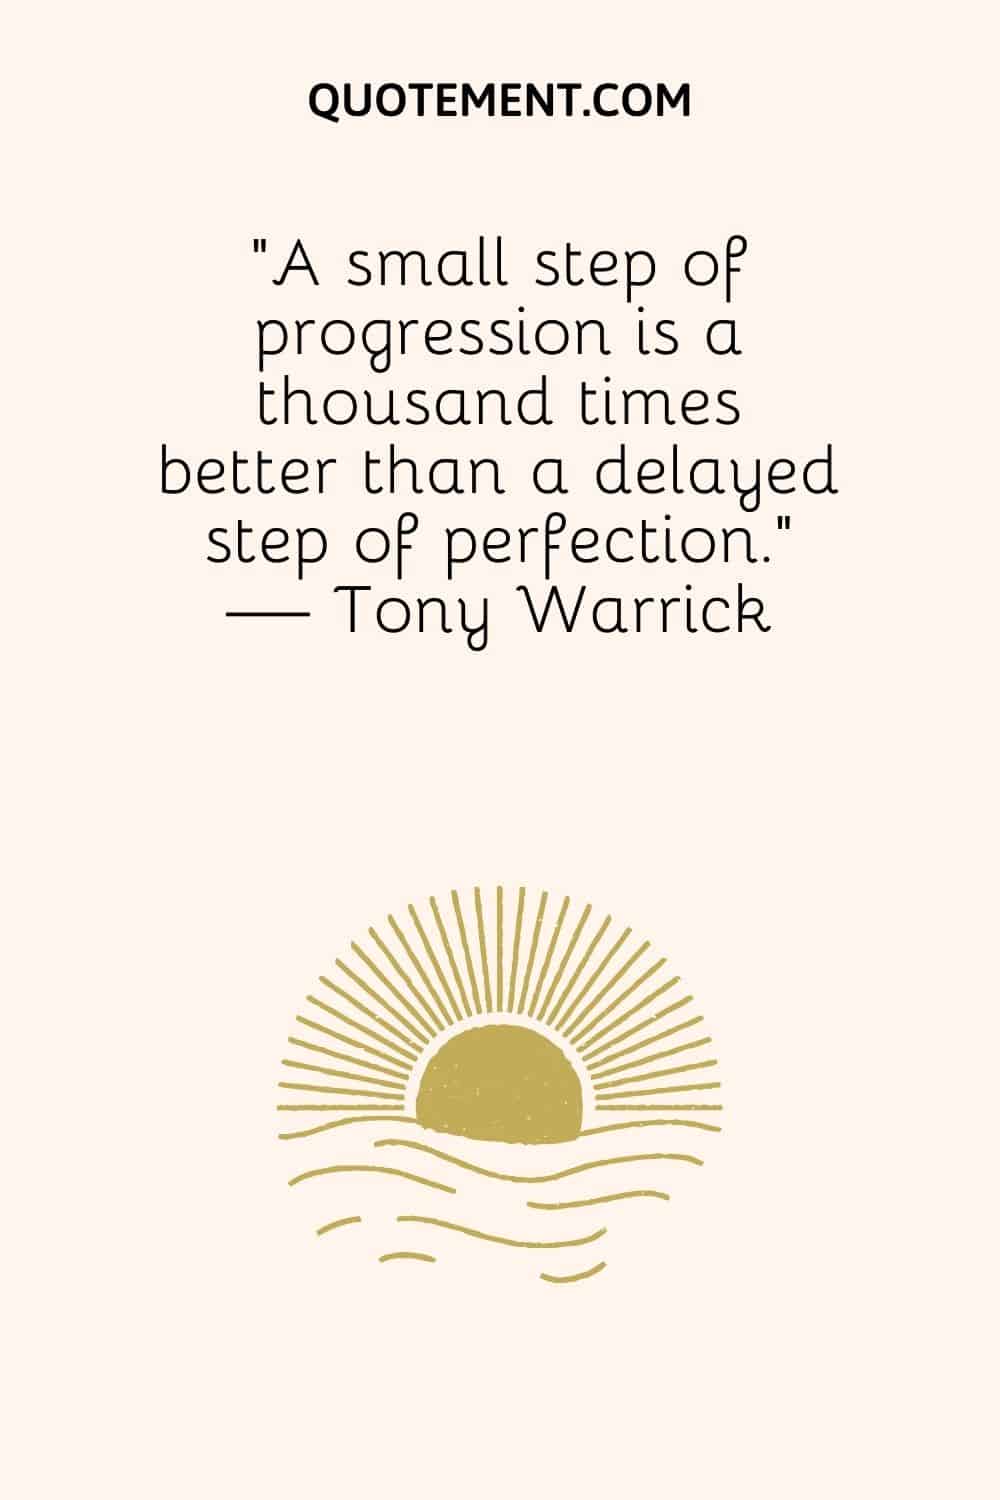 yellow sun and waves representing progress not perfection quote